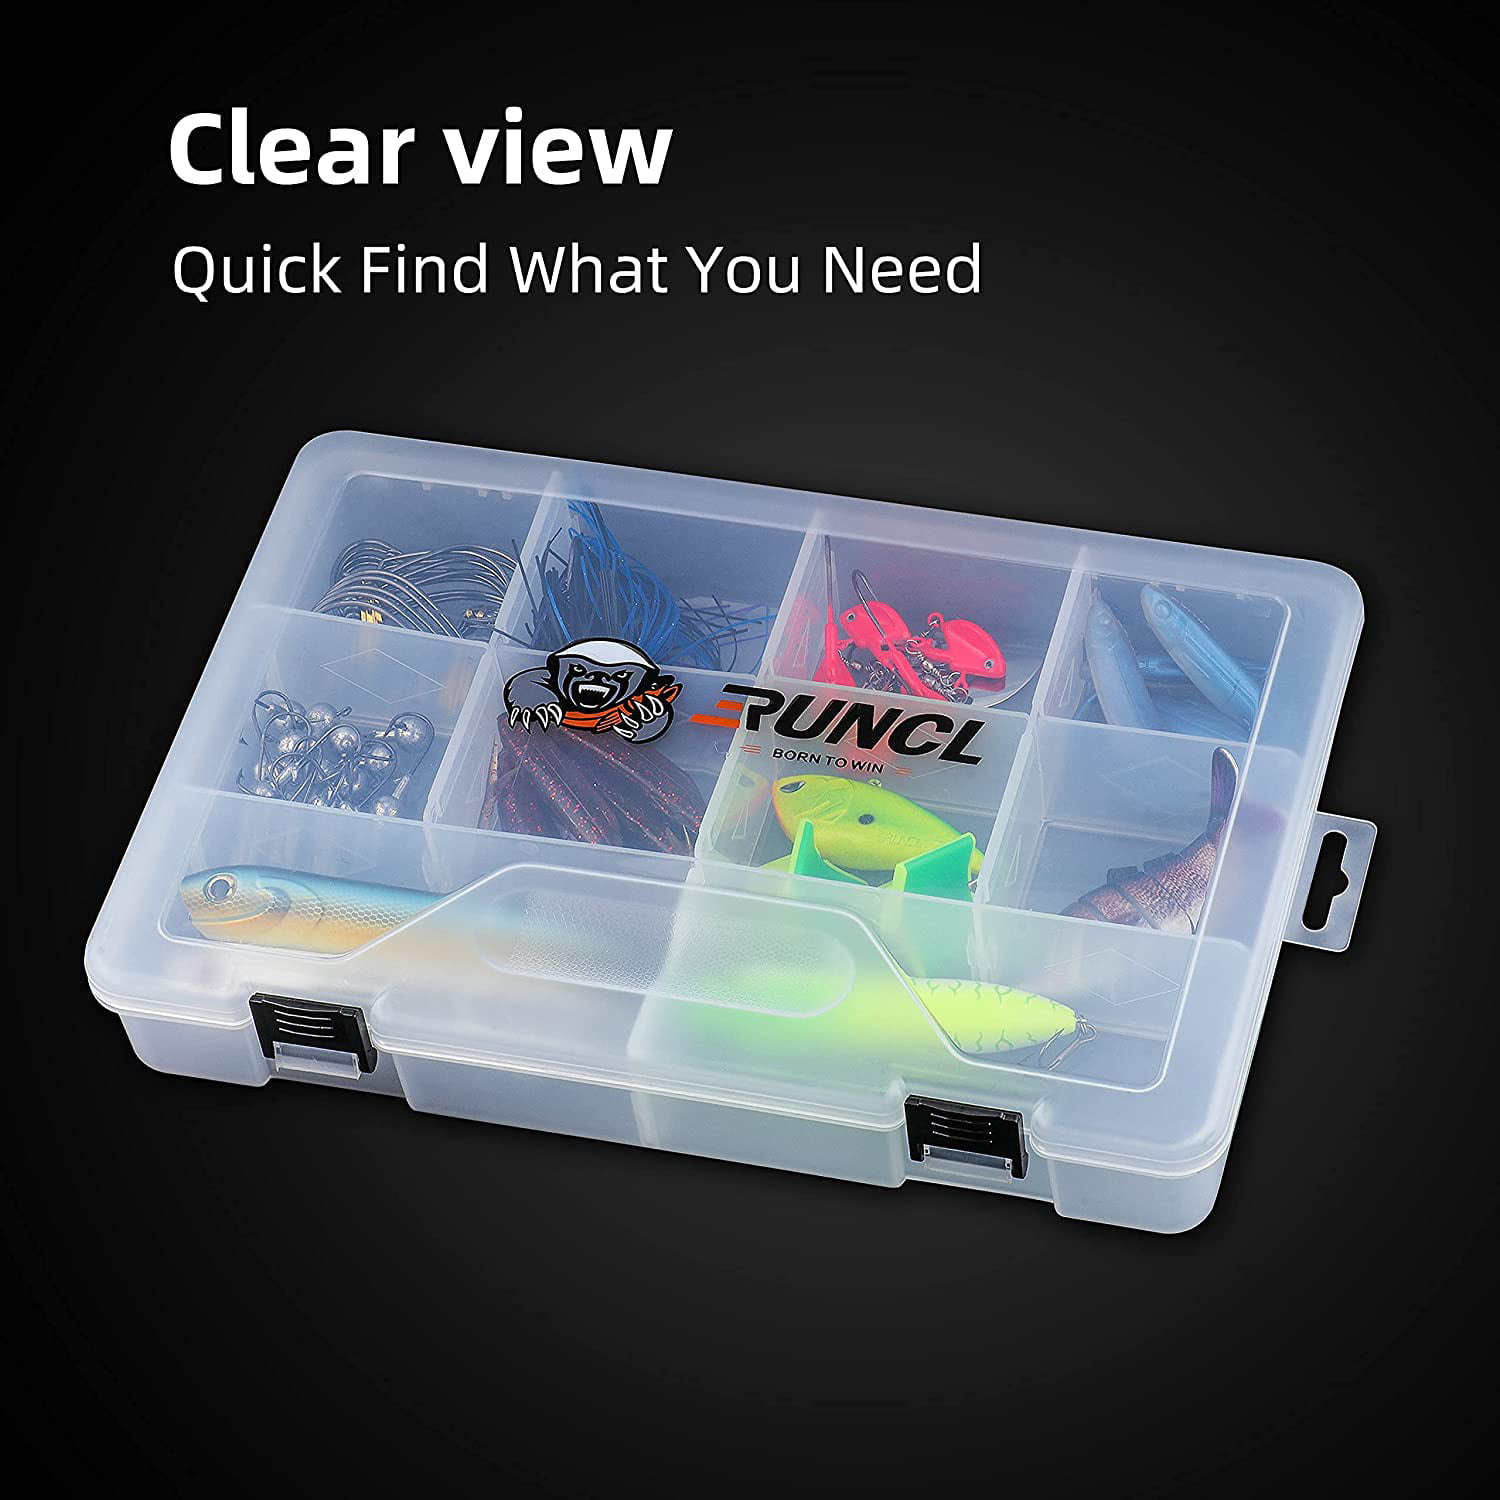 RUNCL Fishing Tackle Box, Plastic Storage Box with Removable Dividers,  3500/3600/3700 Tackle Boxes Organizer - Fishing Combo Set, Clear Tackle  Storage